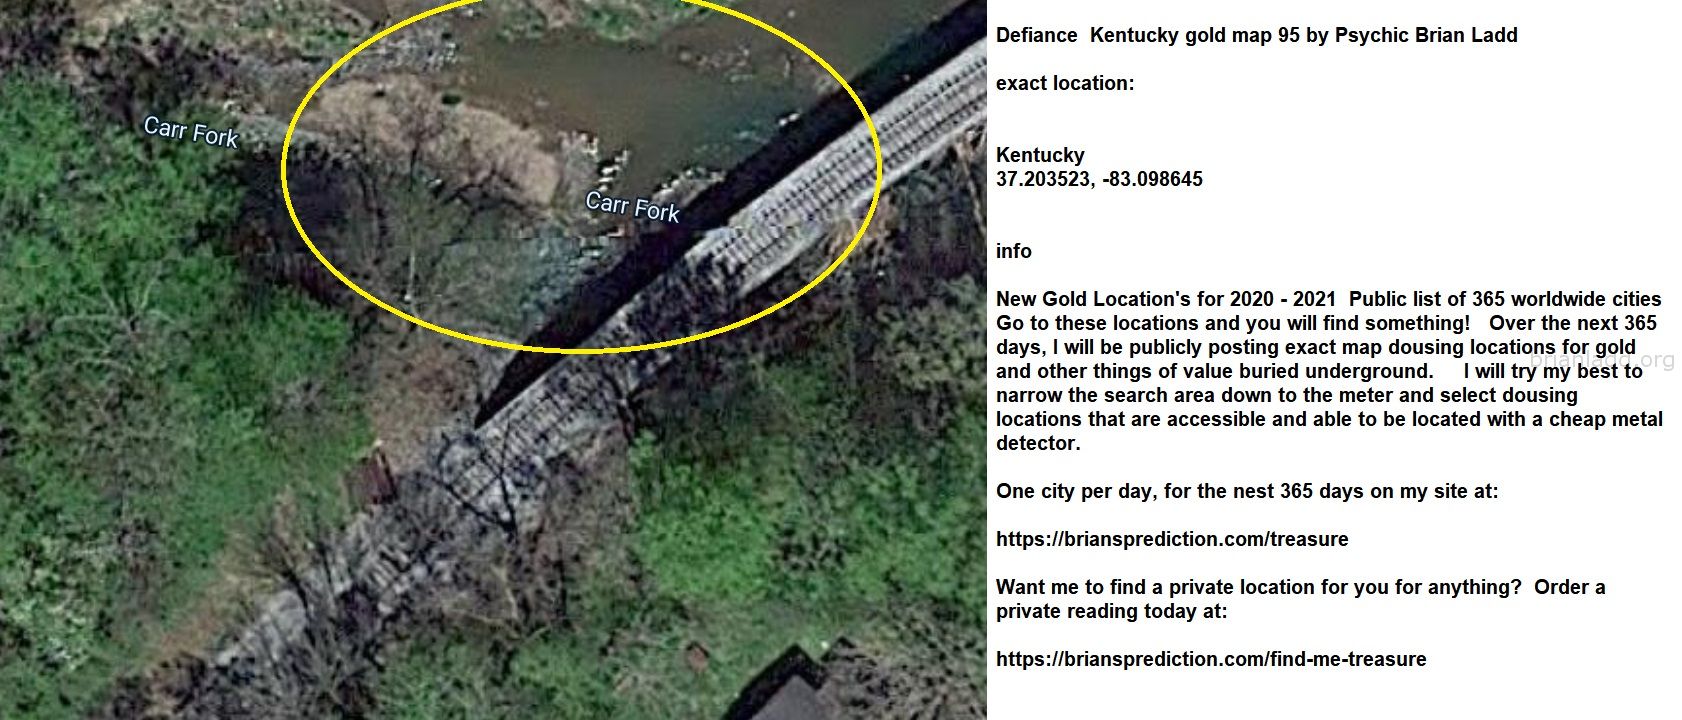 Defiance Kentucky Gold Map 95 By Psychic Brian Ladd - Defiance  Kentucky Gold Map 95 By Psychic Brian Ladd  Exact Locati...
Defiance  Kentucky Gold Map 95 By Psychic Brian Ladd  Exact Location:  Kentucky  37.203523, -83.098645  Info  New Gold Location'S For 2020 - 2021  Public List Of 365 Worldwide Cities  Go To These Locations And You Will Find Something!  Over The Next 365 Days, I Will Be Publicly Posting Exact Map Dousing Locations For Gold And Other Things Of Value Buried Underground.  I Will Try My Best To Narrow The Search Area Down To The Meter And Select Dousing Locations That Are Accessible And Able To Be Located With A Cheap Metal Detector.  One City Per Day, For The Nest 365 Days On My Site At:   https://briansprediction.com/Treasure  Want Me To Find A Private Location For You For Anything?  Order A Private Reading Today At:   https://briansprediction.com/Find-Me-Treasure
